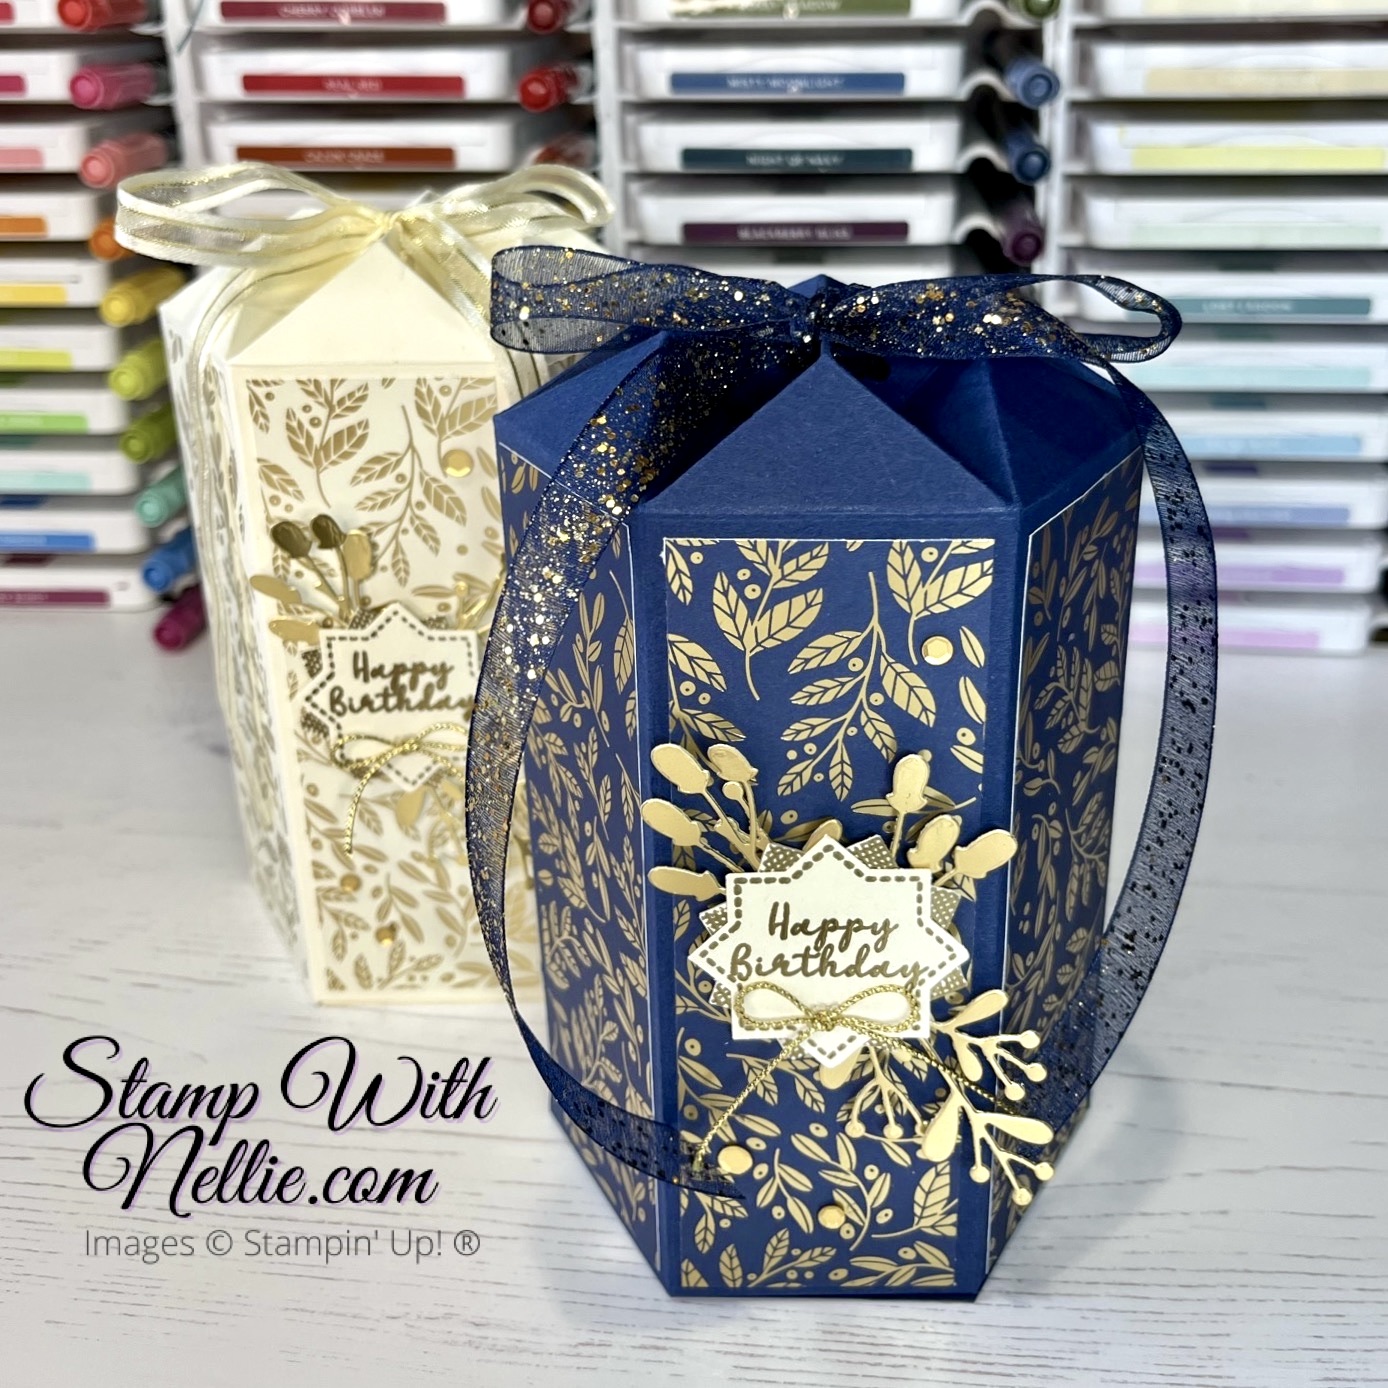 Photo of a dark blue and gold hexagonal gift box in the foreground with a cream and gold one behind it